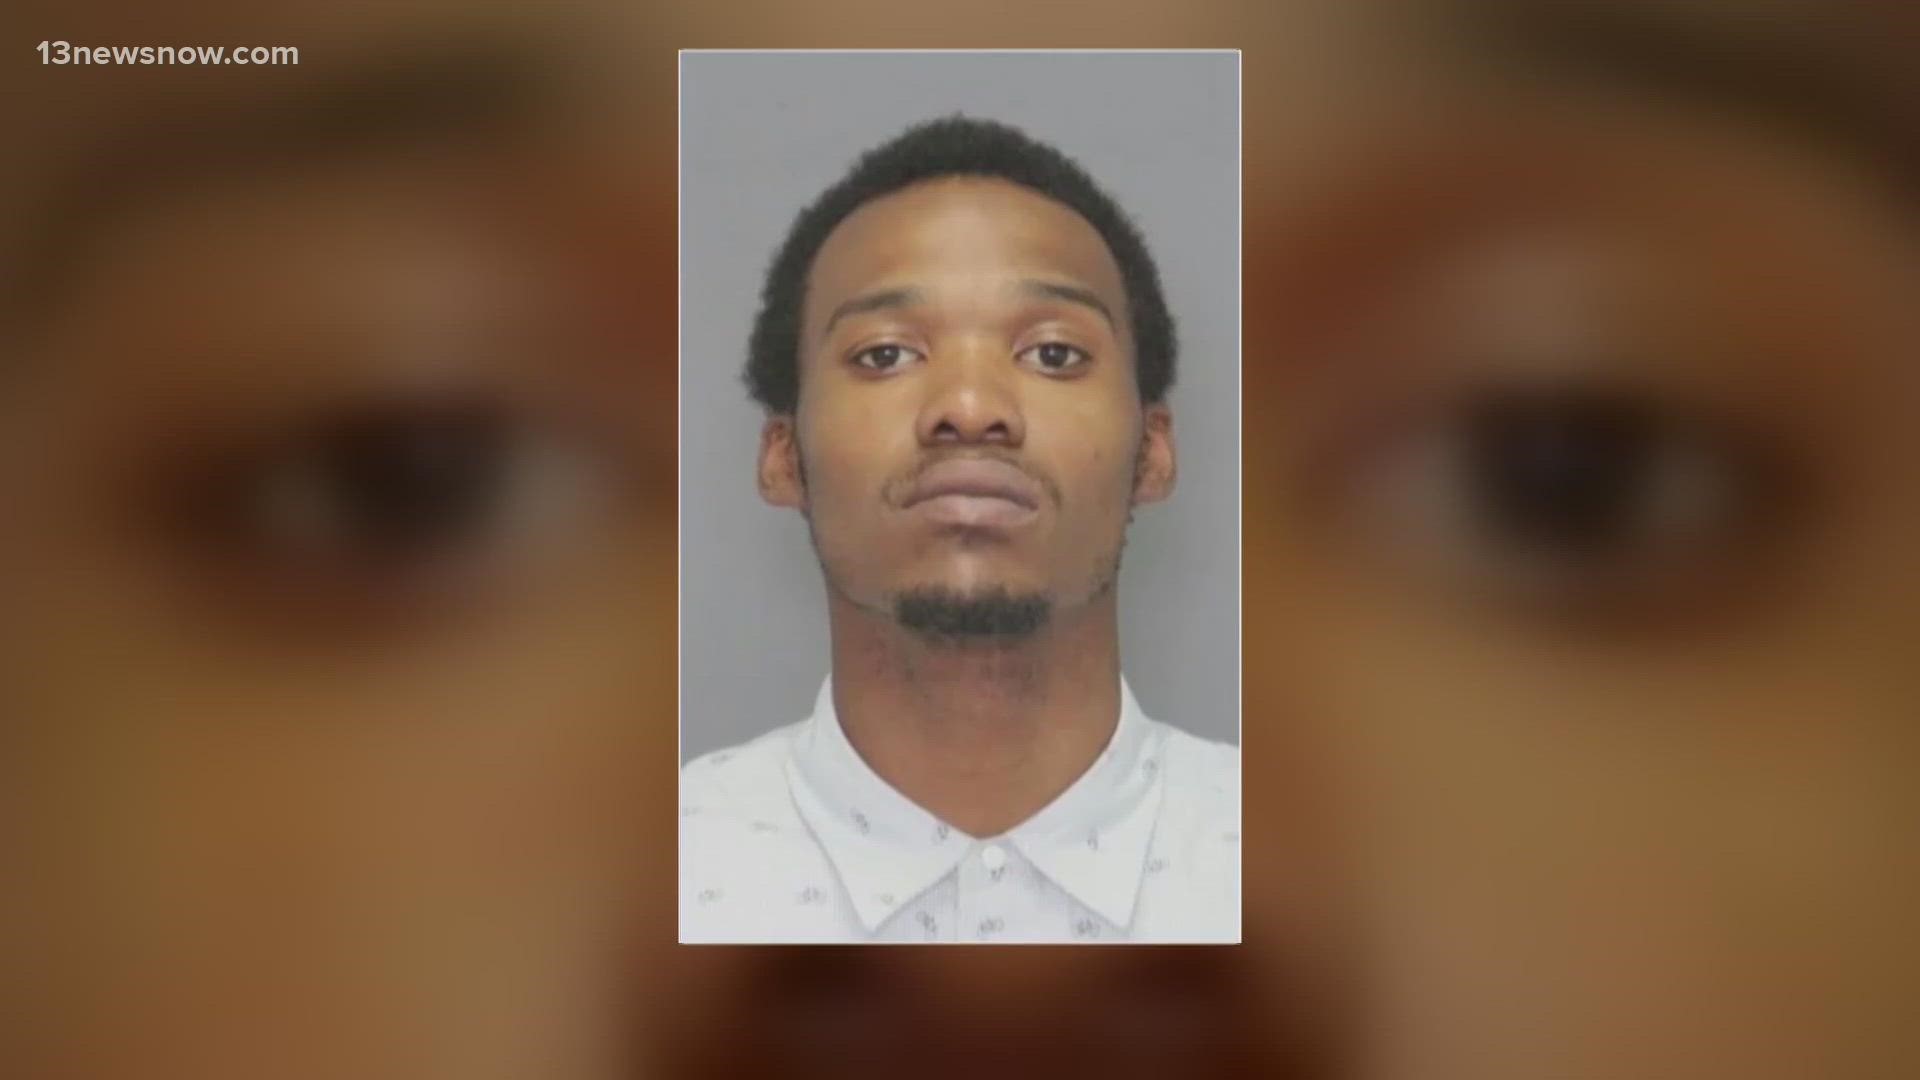 Javon Doyle faces first-degree murder and several other charges in the 2011 death of Old Dominion University student Christopher Cummings.